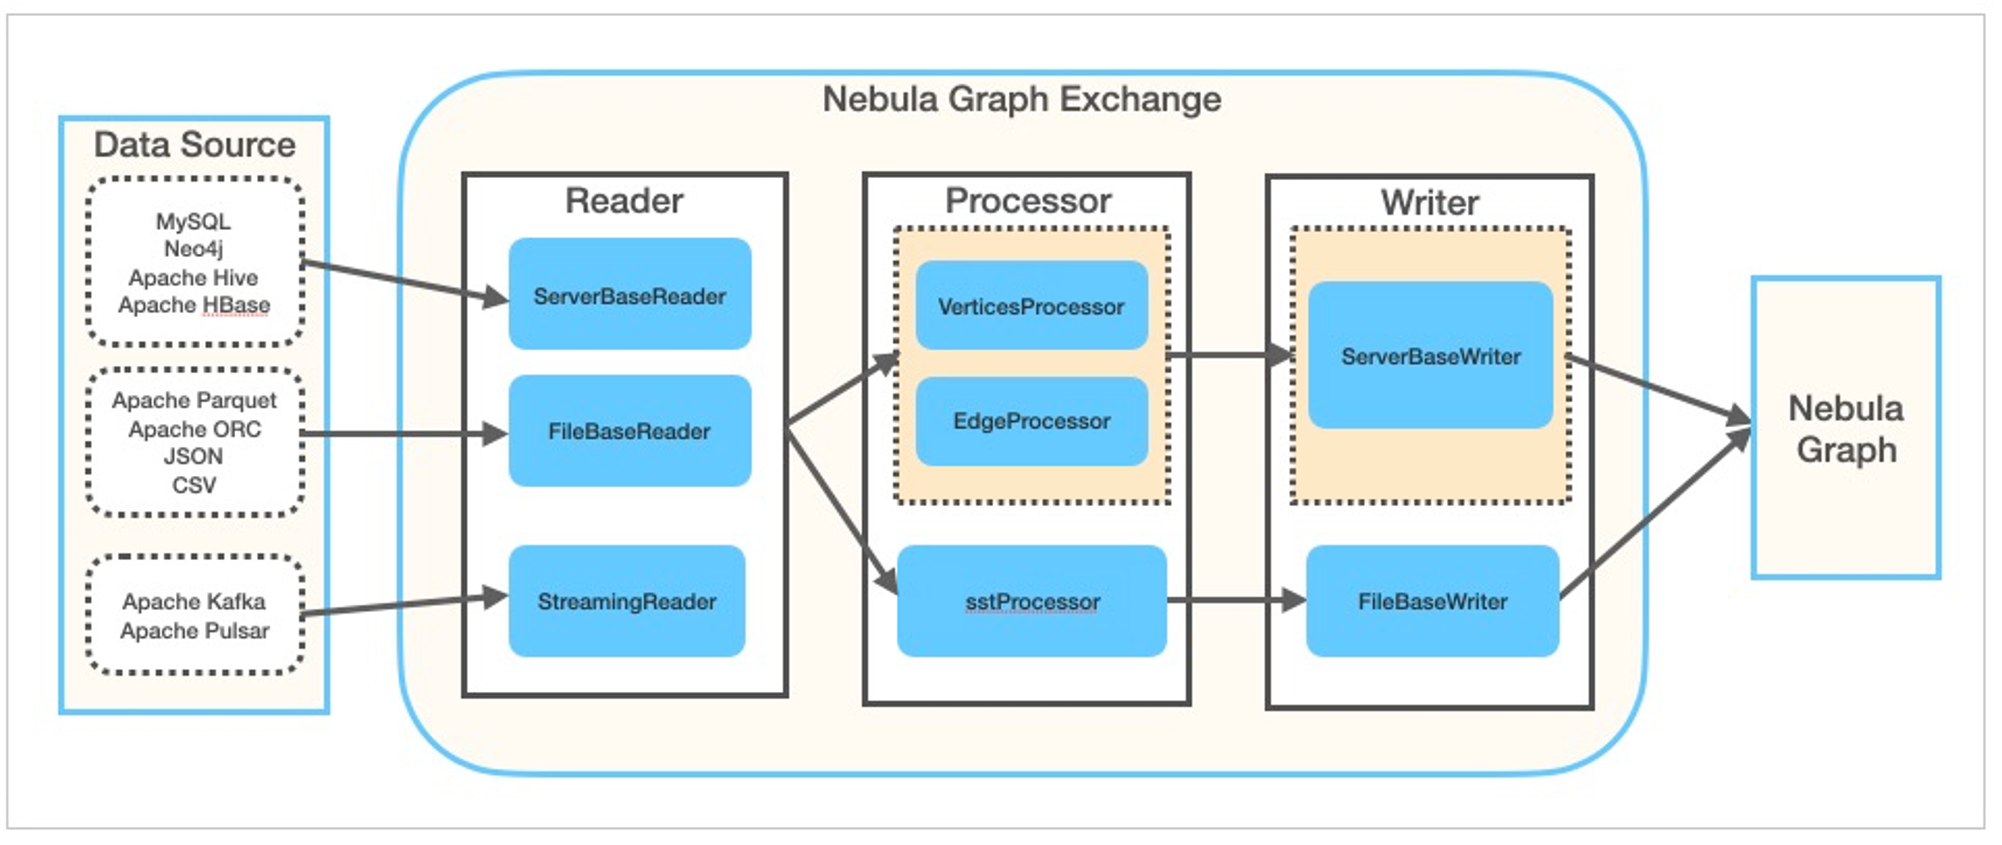 NebulaGraph® Exchange consists of Reader, Processor, and Writer that can migrate data from a variety of formats and sources to NebulaGraph